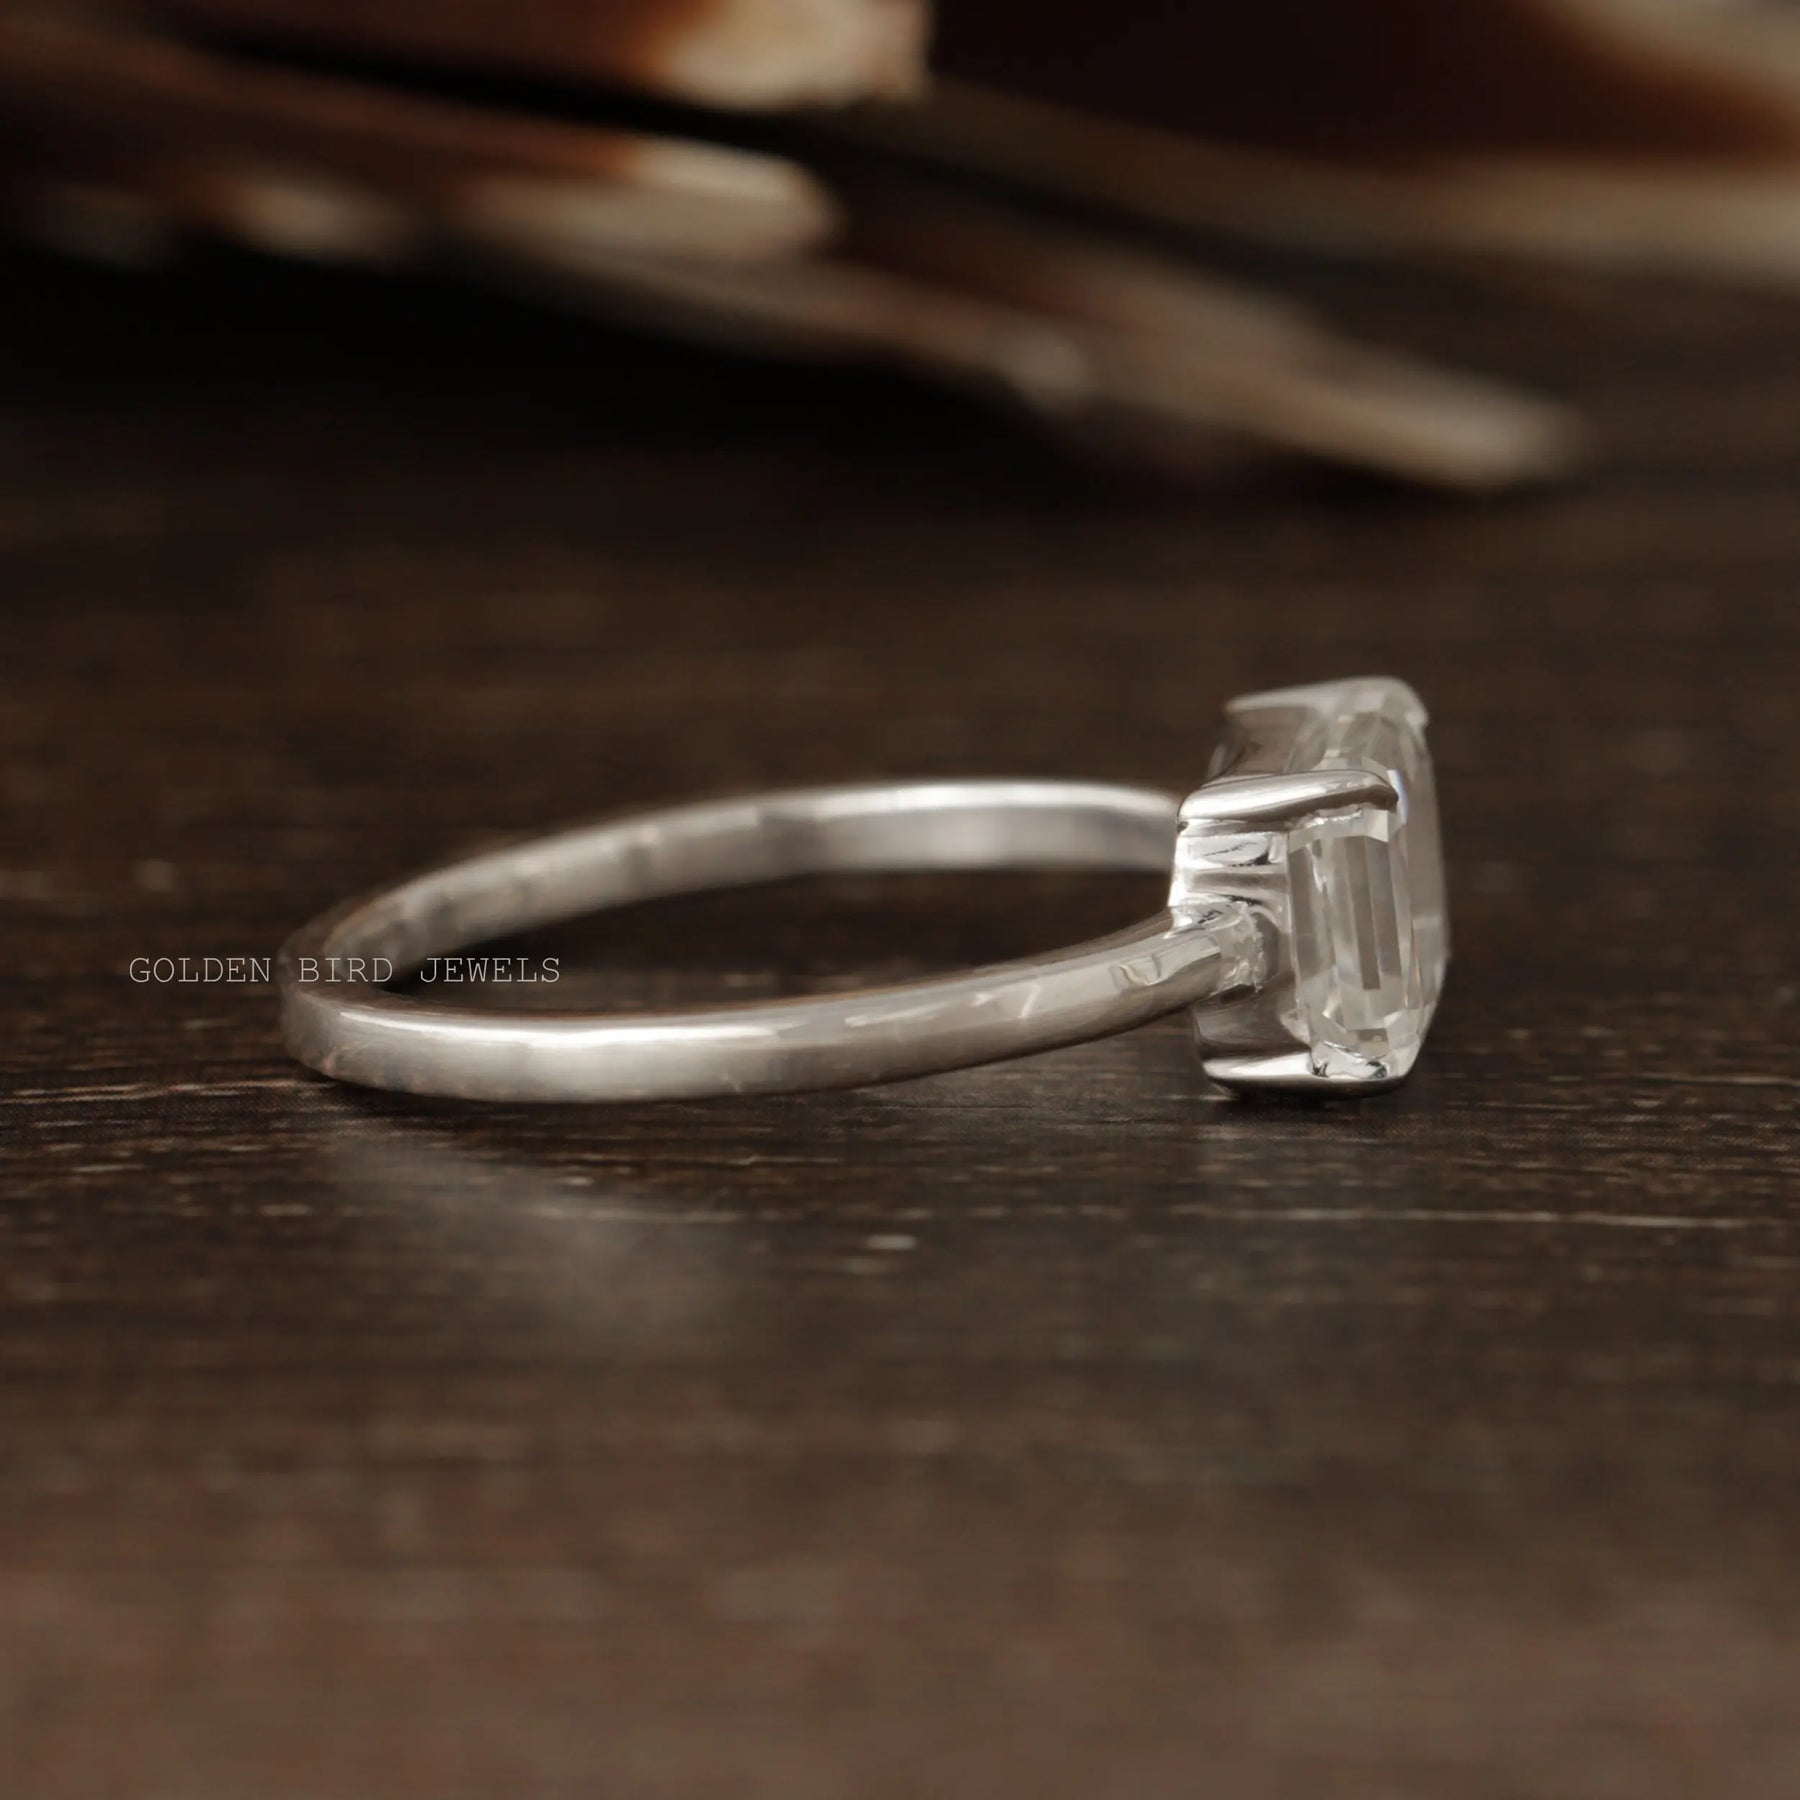 [Side view of portrait cut radiant moissanite ring]-[Golden Bird Jewels]